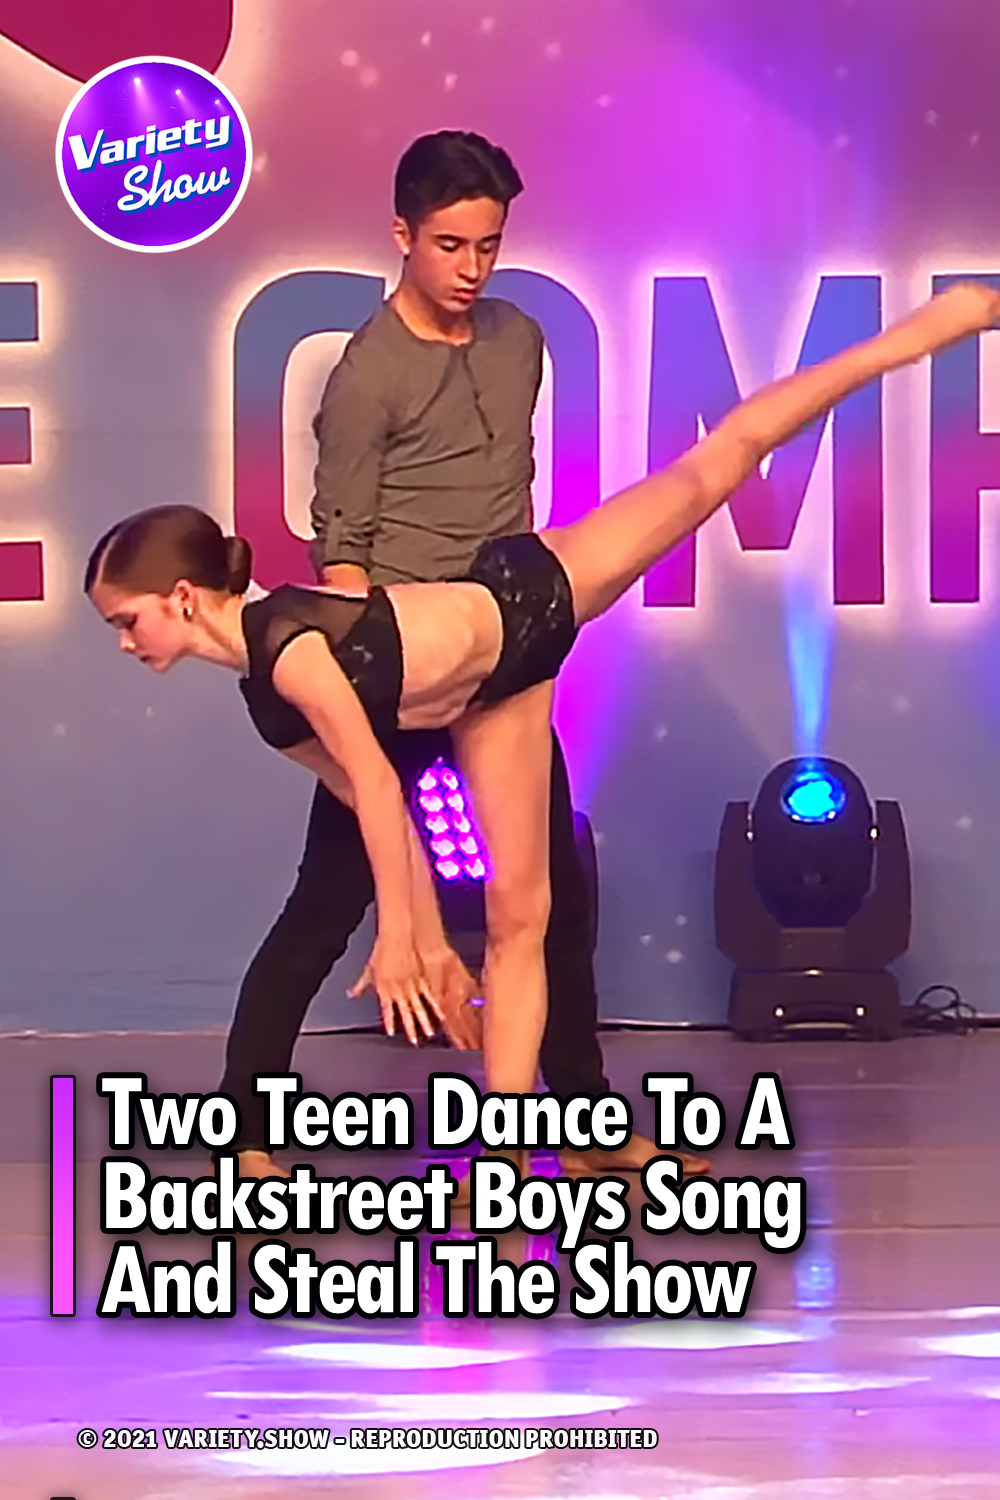 Two Teen Dance To A Backstreet Boys Song And Steal The Show